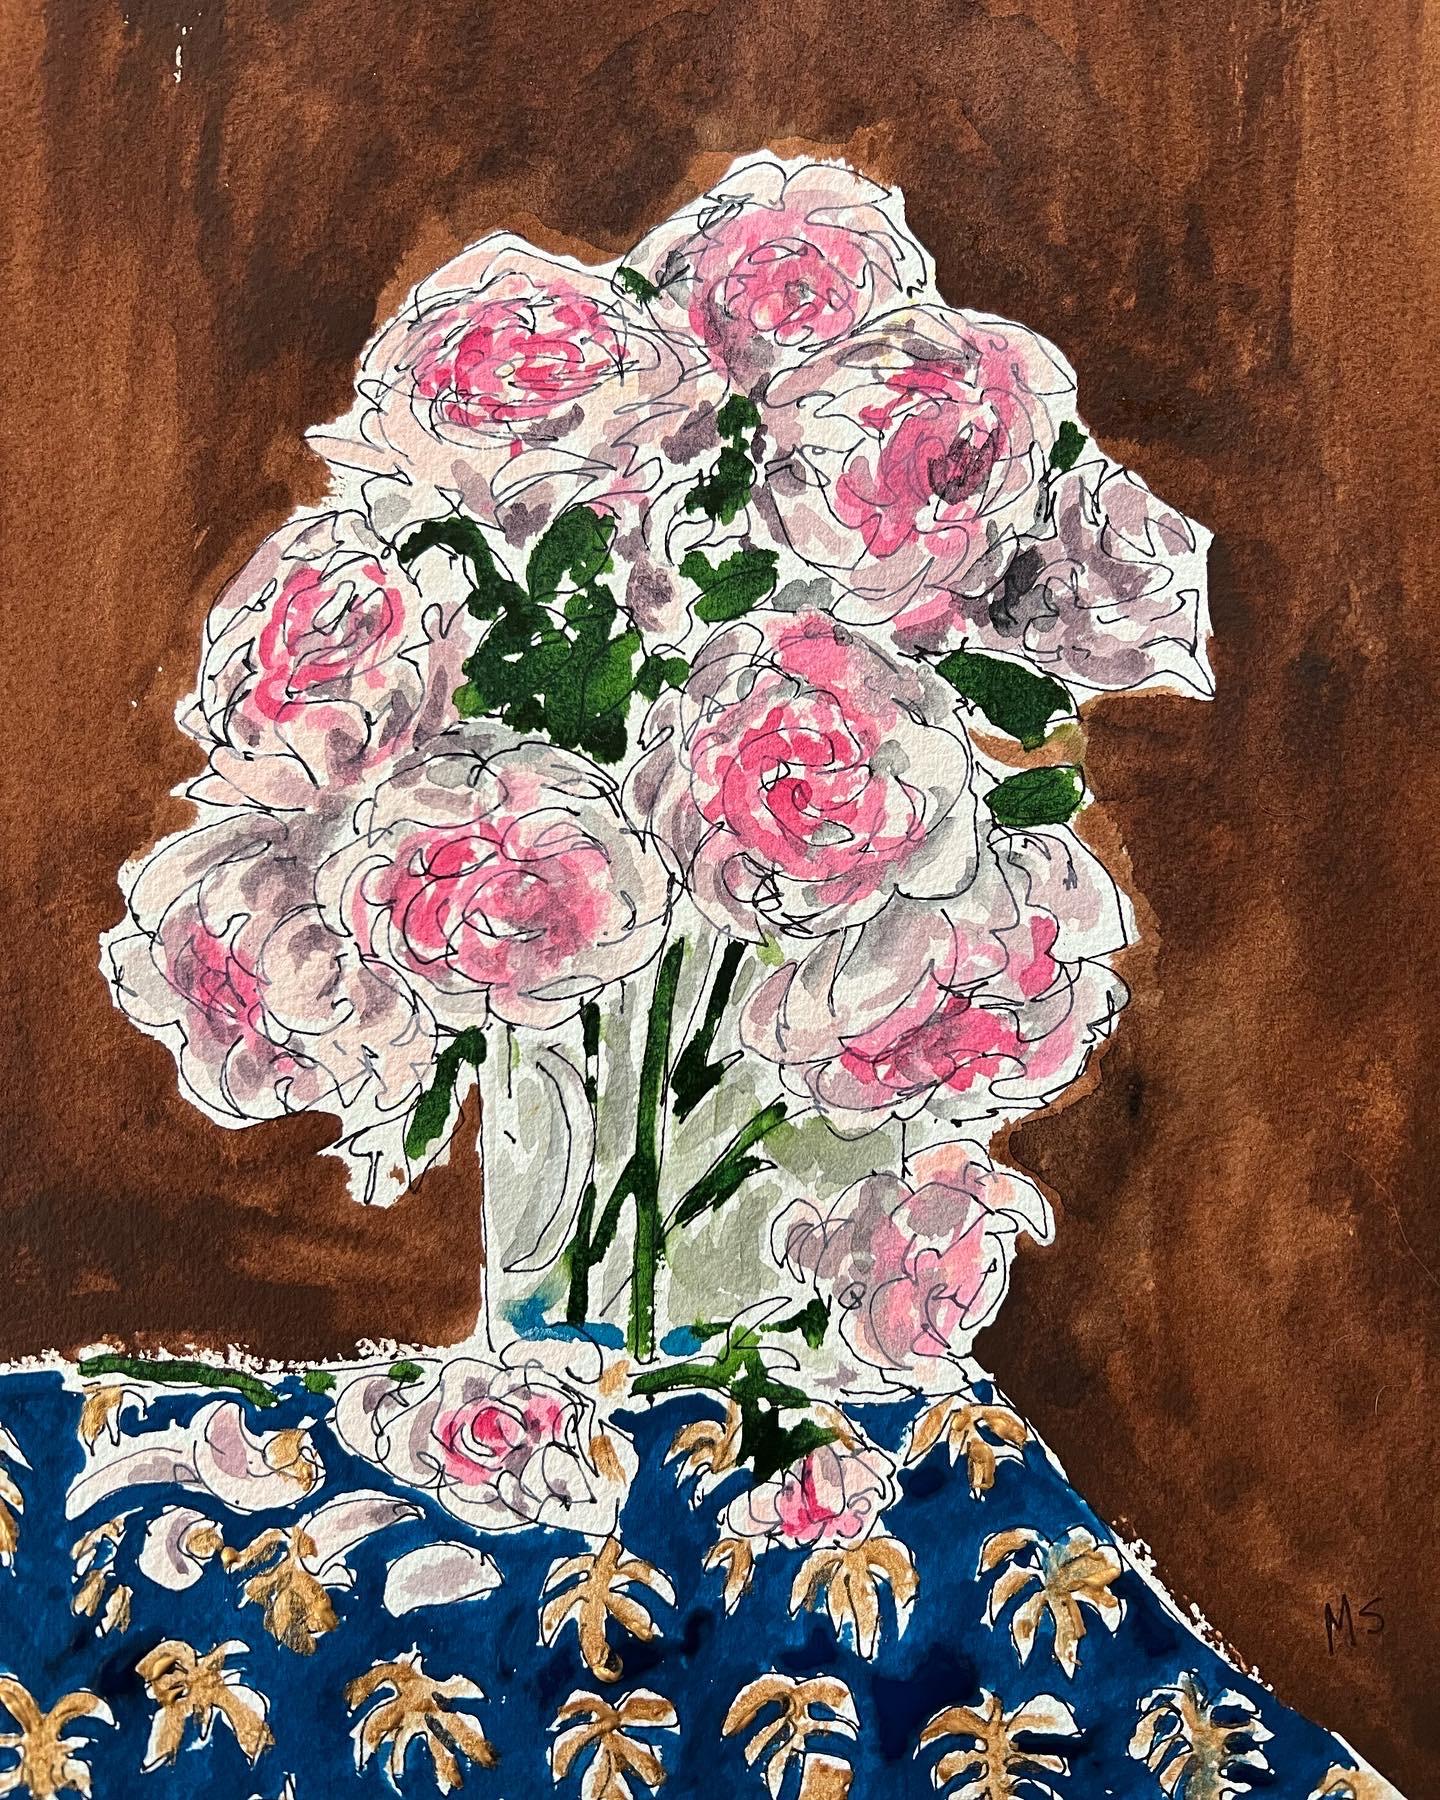 A vase full of Roses. Ink pen, Gouache, and watercolor on paper  - Painting by Manuel Santelices